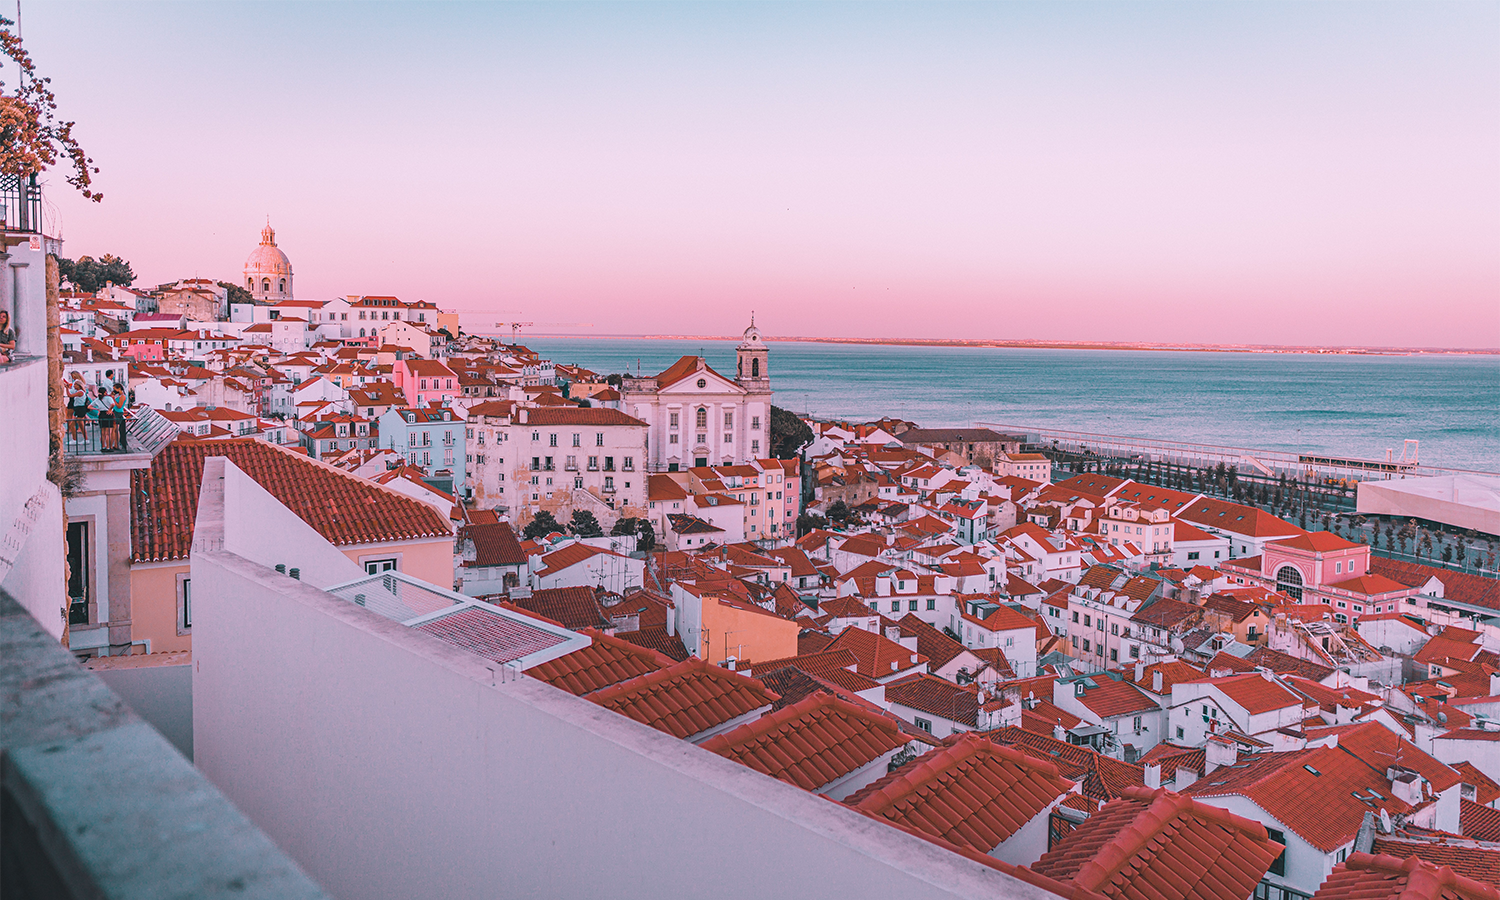 Experiencing sunsets in Lisbon - one of the highlights of living in Portugal.